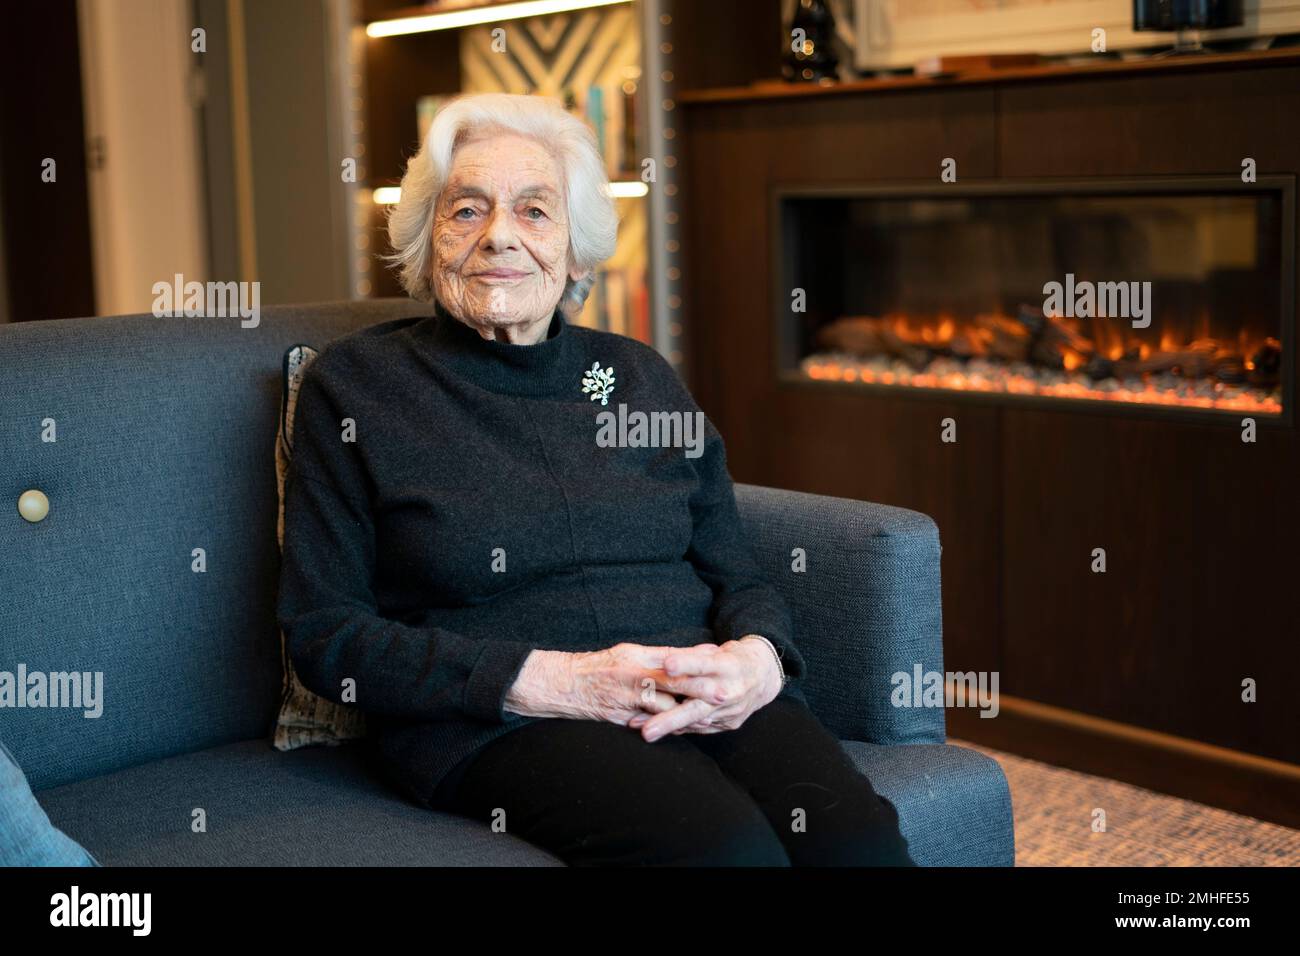 Holocaust survivor Vera Schaufeld at her home in north London, ahead of Holocaust Memorial Day. Vera was born in Prague in 1930 and transported via the Kindertransport to the UK in 1939 where she lived with a family in Bury St Edmunds. Her father was the head of the Jewish community in the small town she grew up in and none of her family who remained in central Europe survived the war. Vera went on to train as a teacher. Picture date: Thursday January 26, 2023. Stock Photo